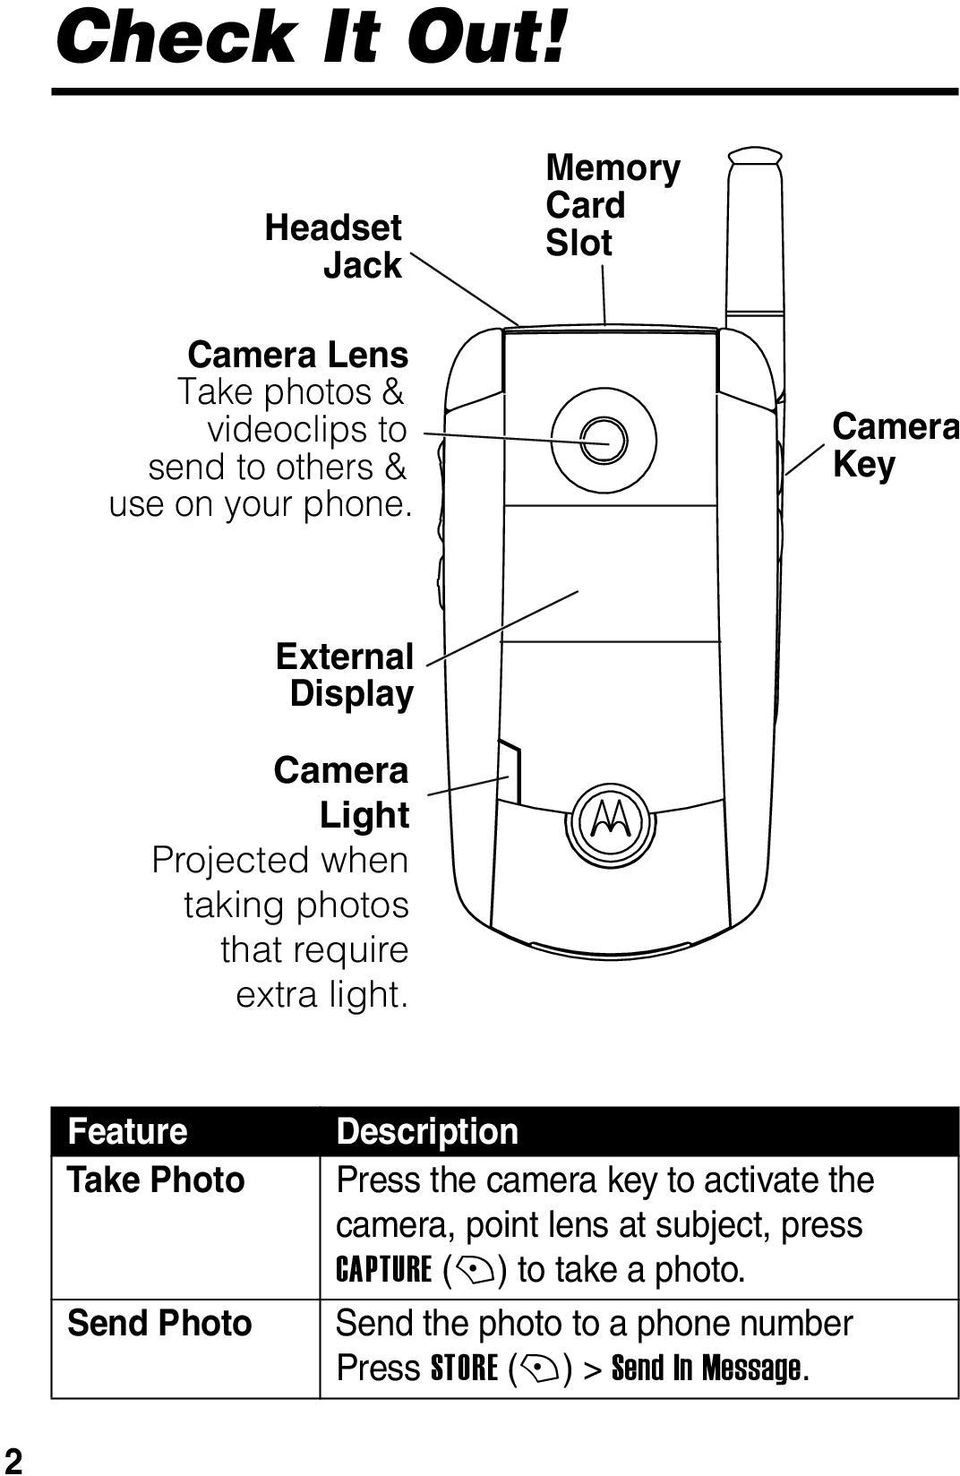 Camera Key External Display Camera Light Projected when taking photos that require extra light.